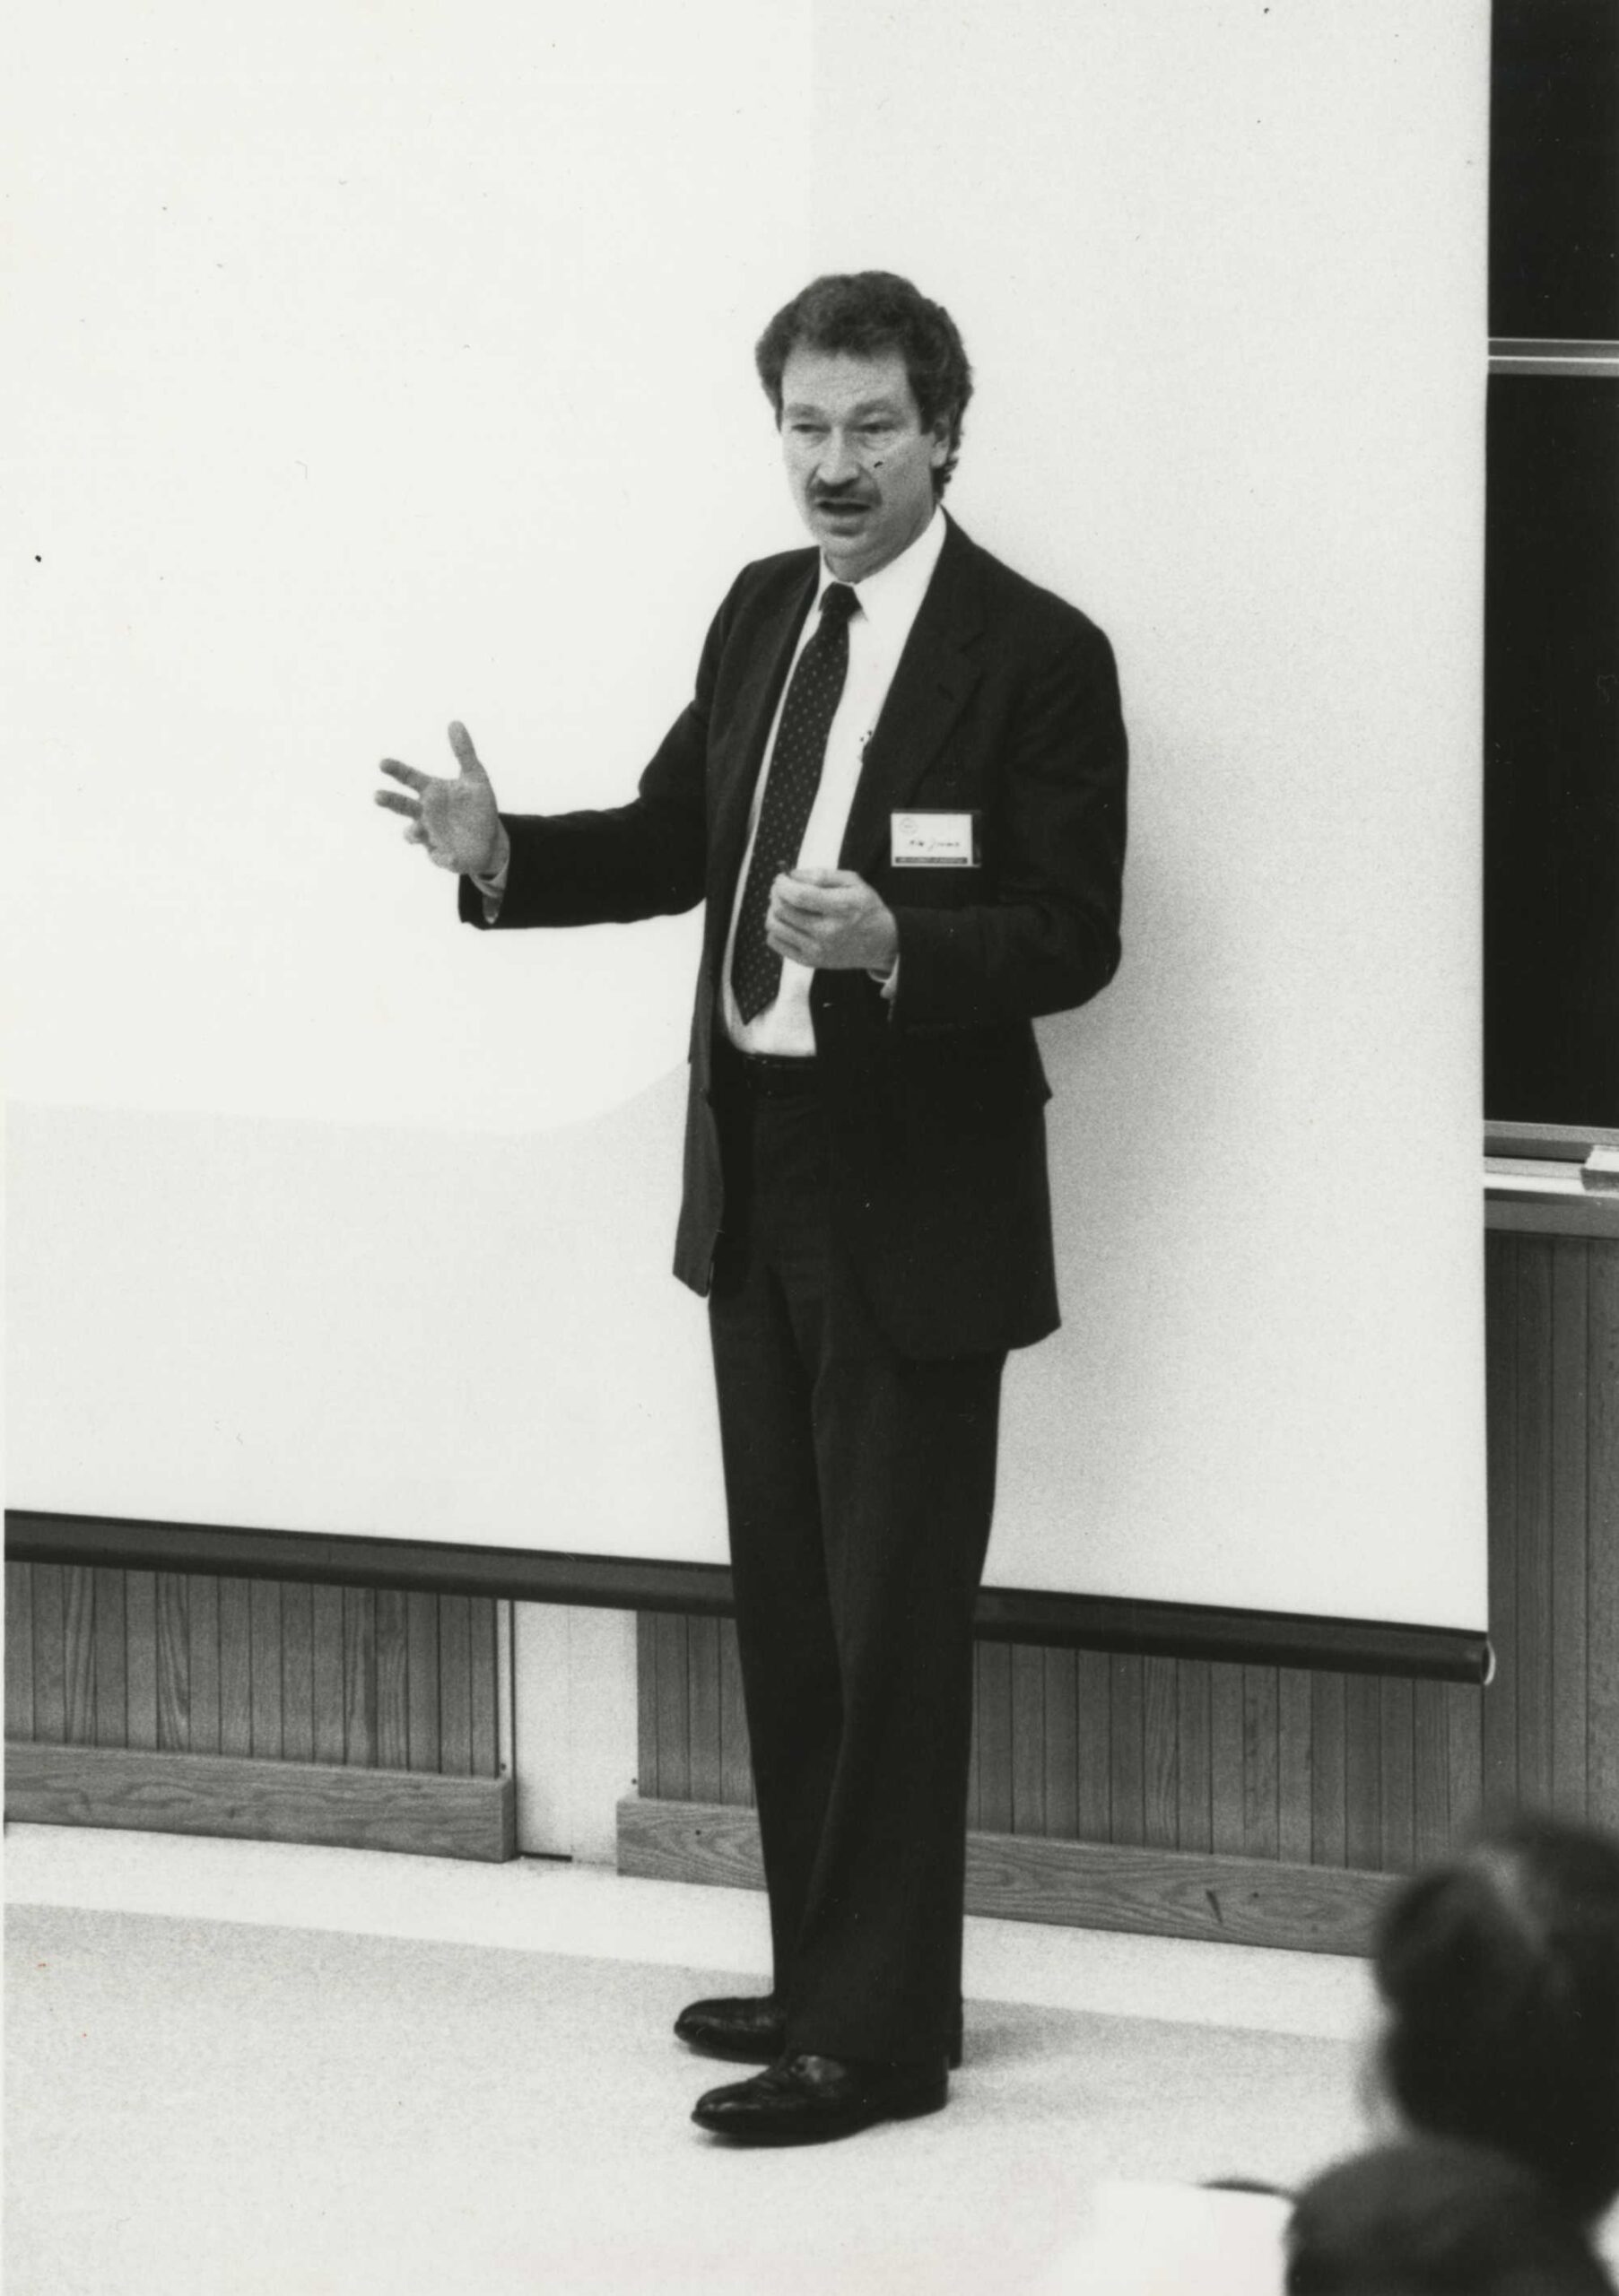 Black and white archival image of Michael Jensen in a suit standing in front of a blank lowered retractable projector screen.